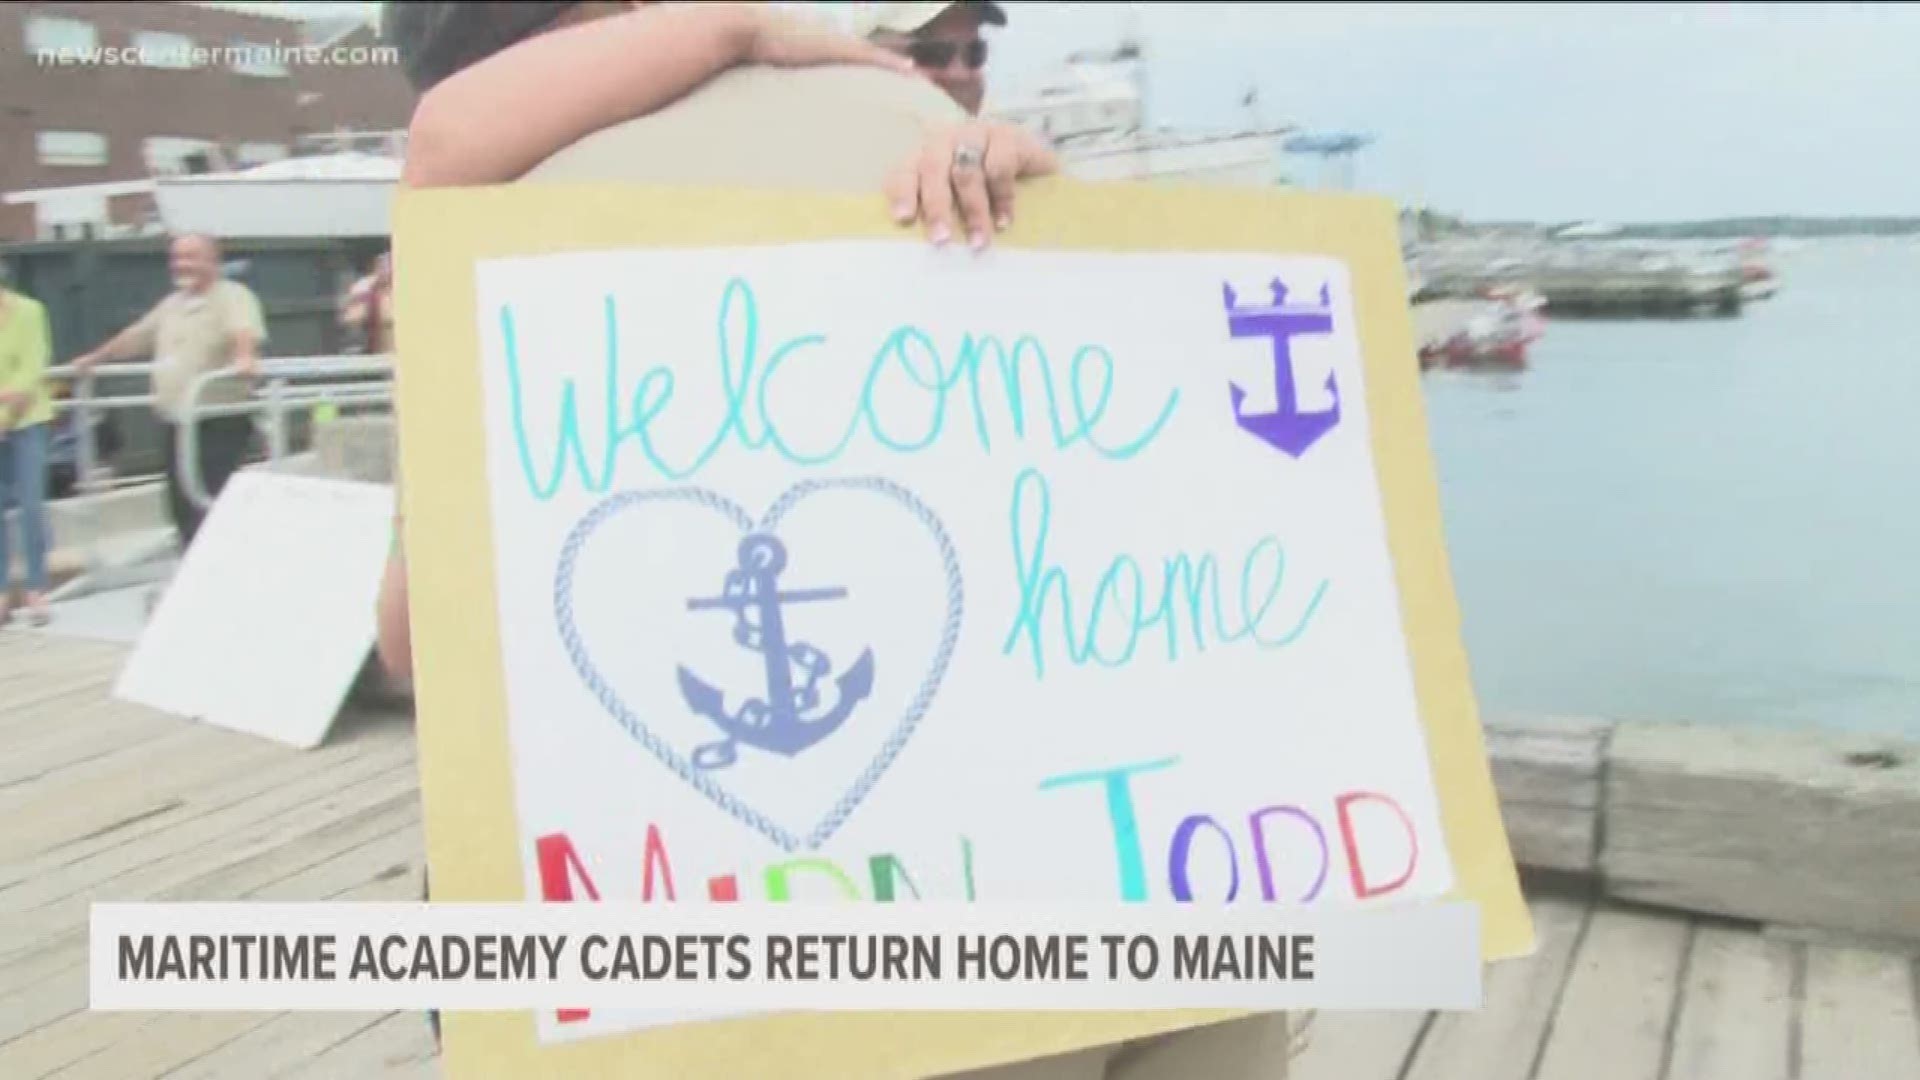 Maritime Academy Cadets return home to Maine